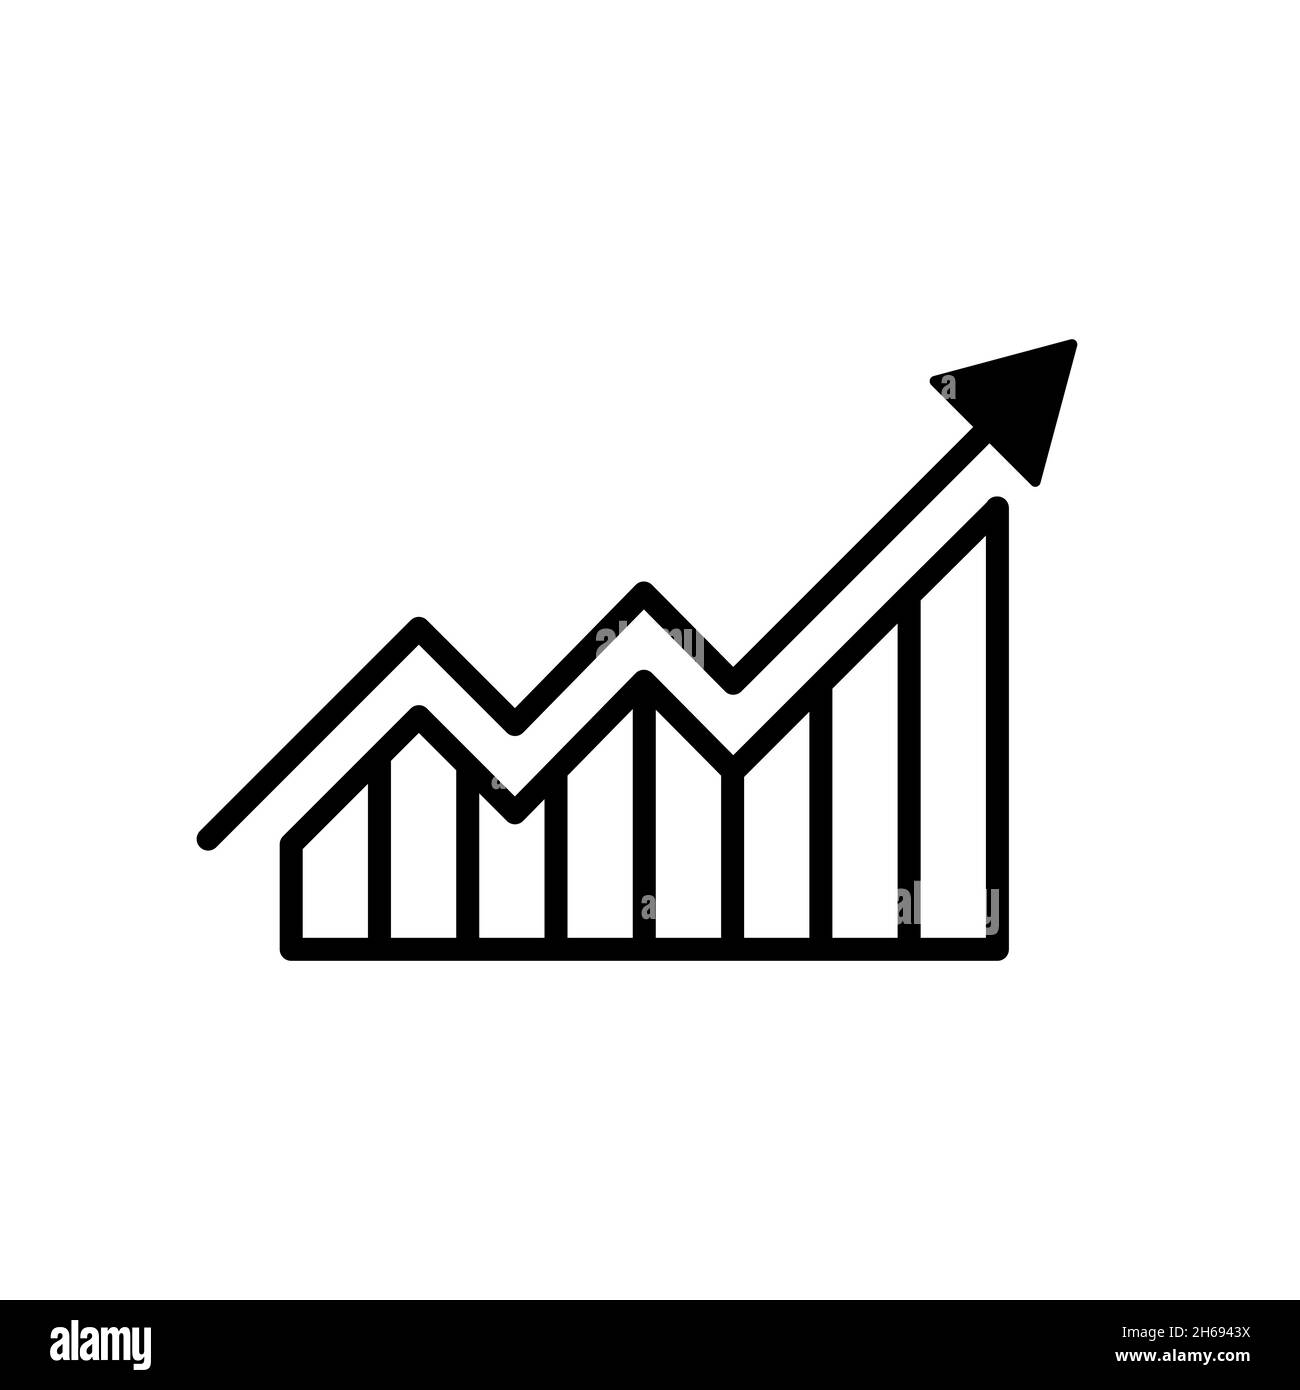 Graph bar icon. Abstract financial chart with uptrend line graph. Linear graph icon. Vector illustration. Stock Vector